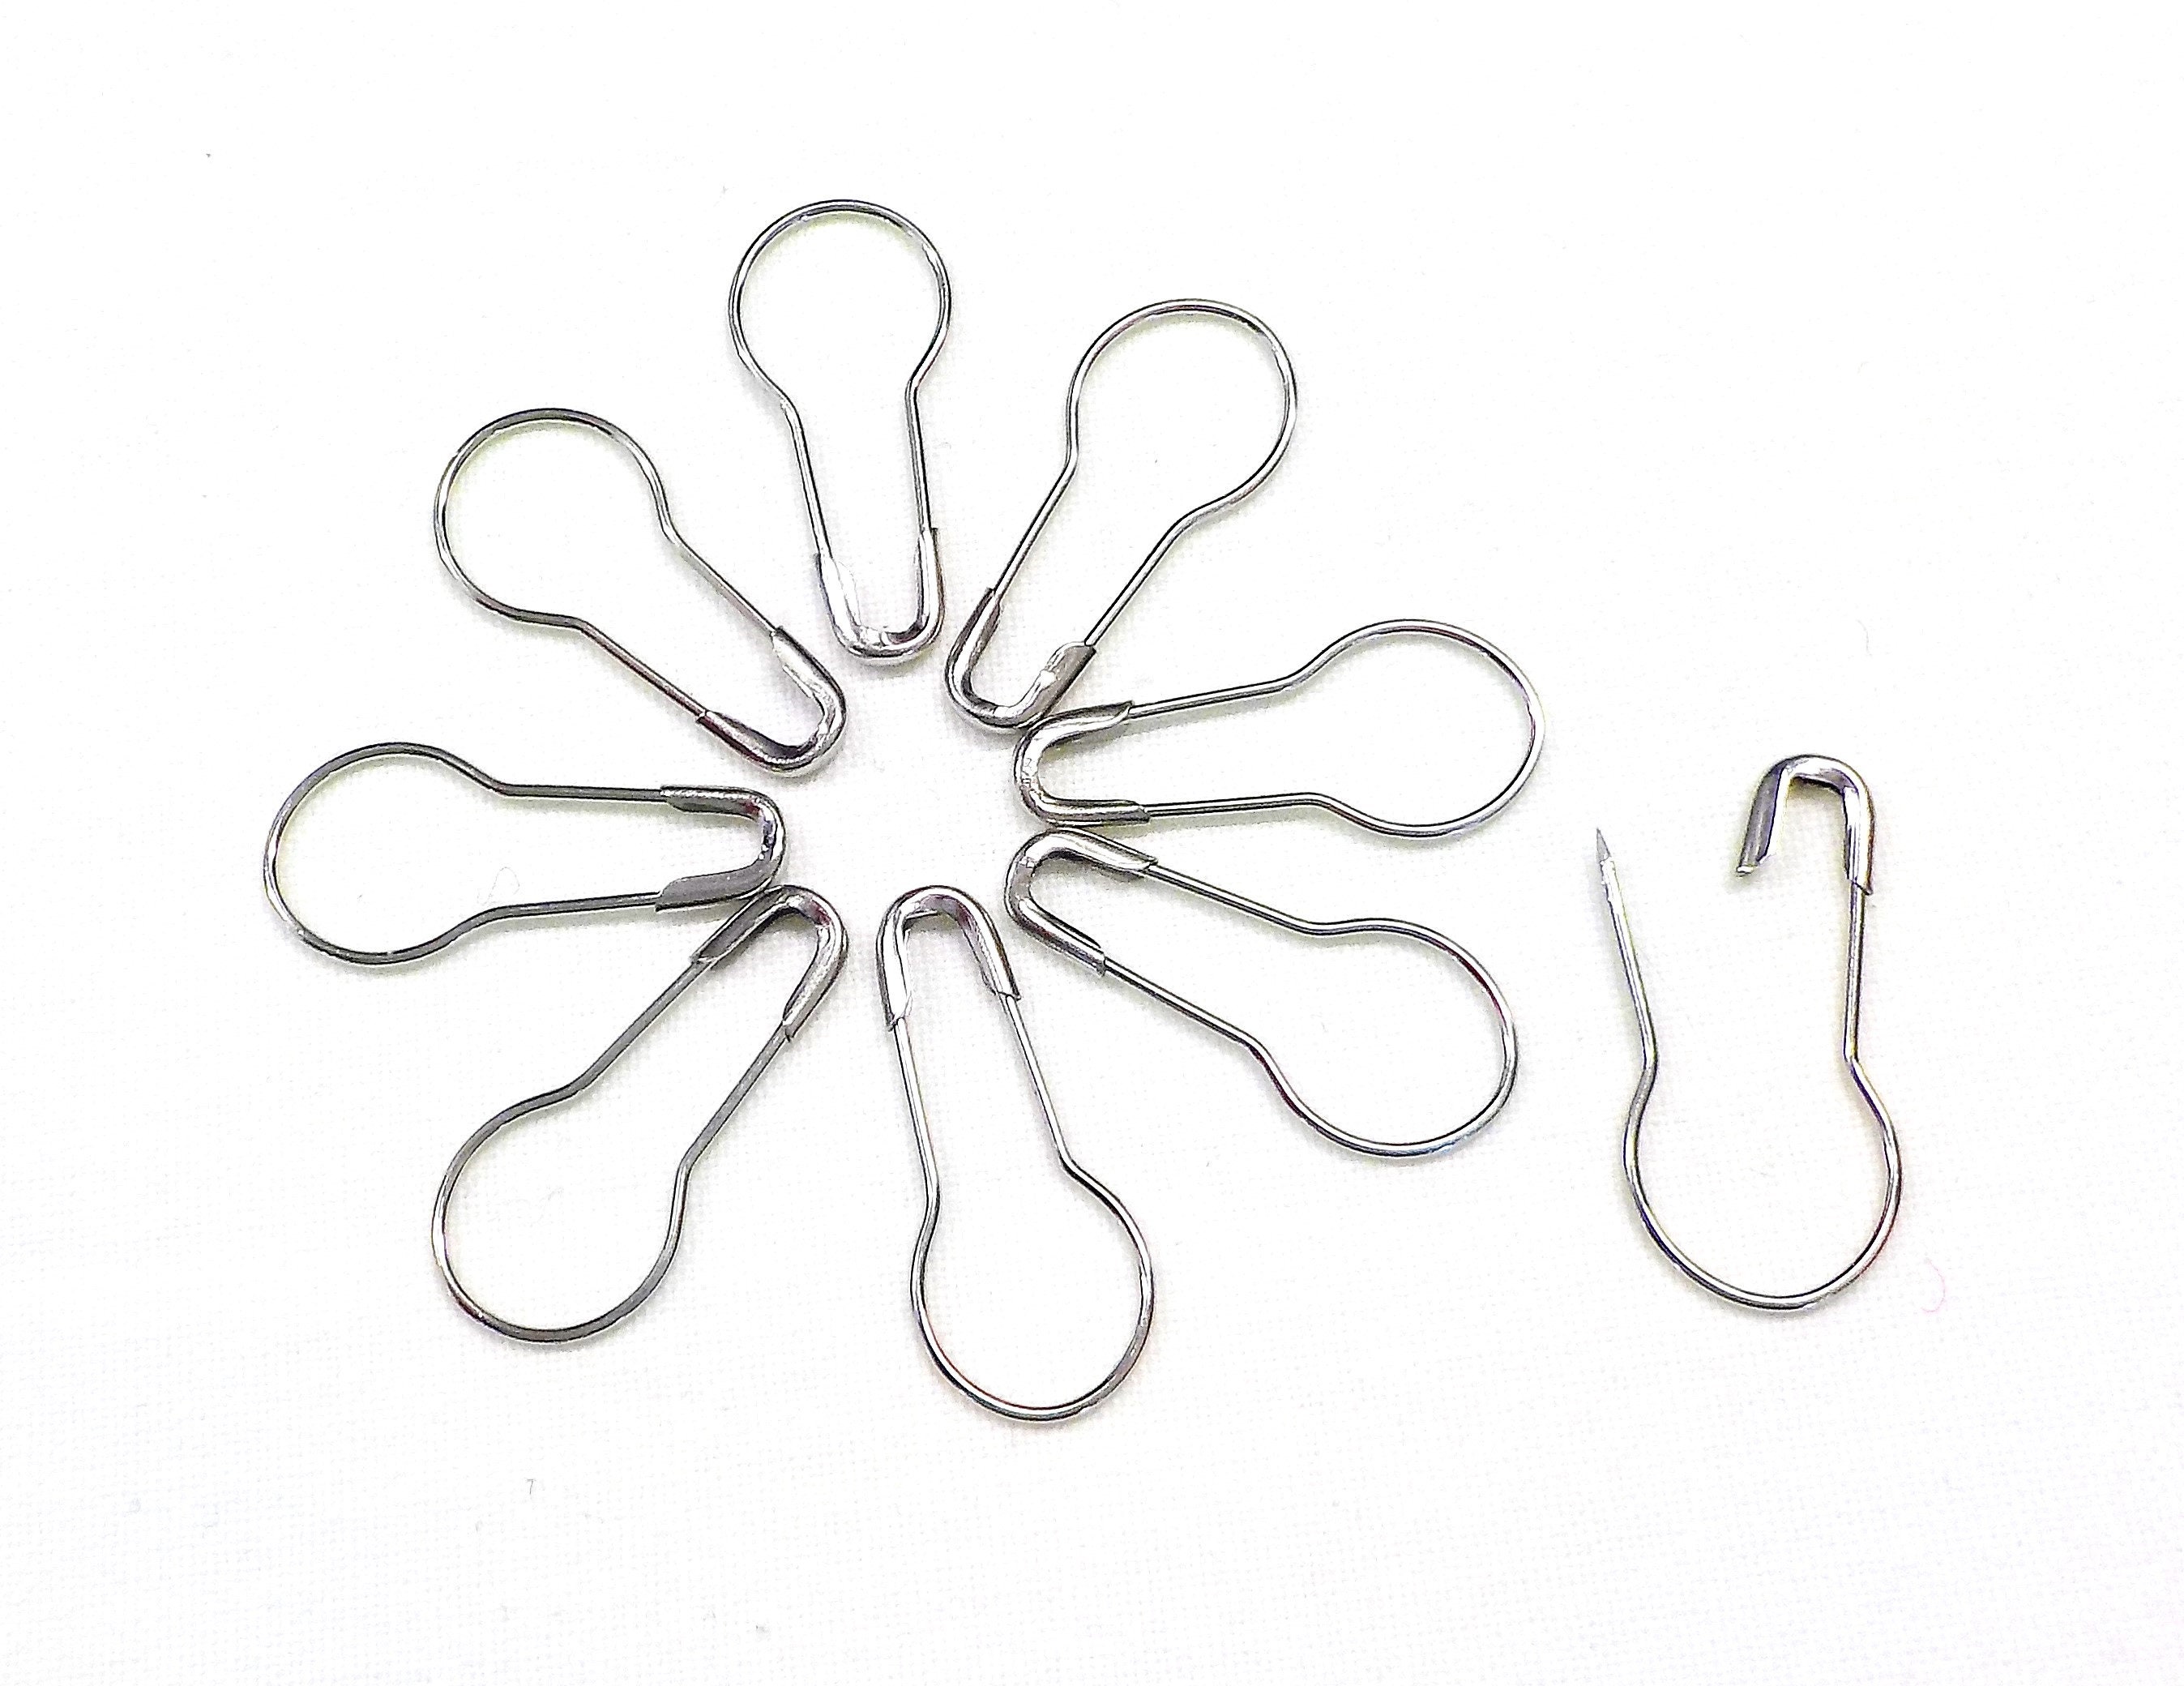 Clothing Safety Pins Fabric Textile Hemming Variety Pack Brooch Clips Dresses  Garments Skirt Jewellery Pinning 